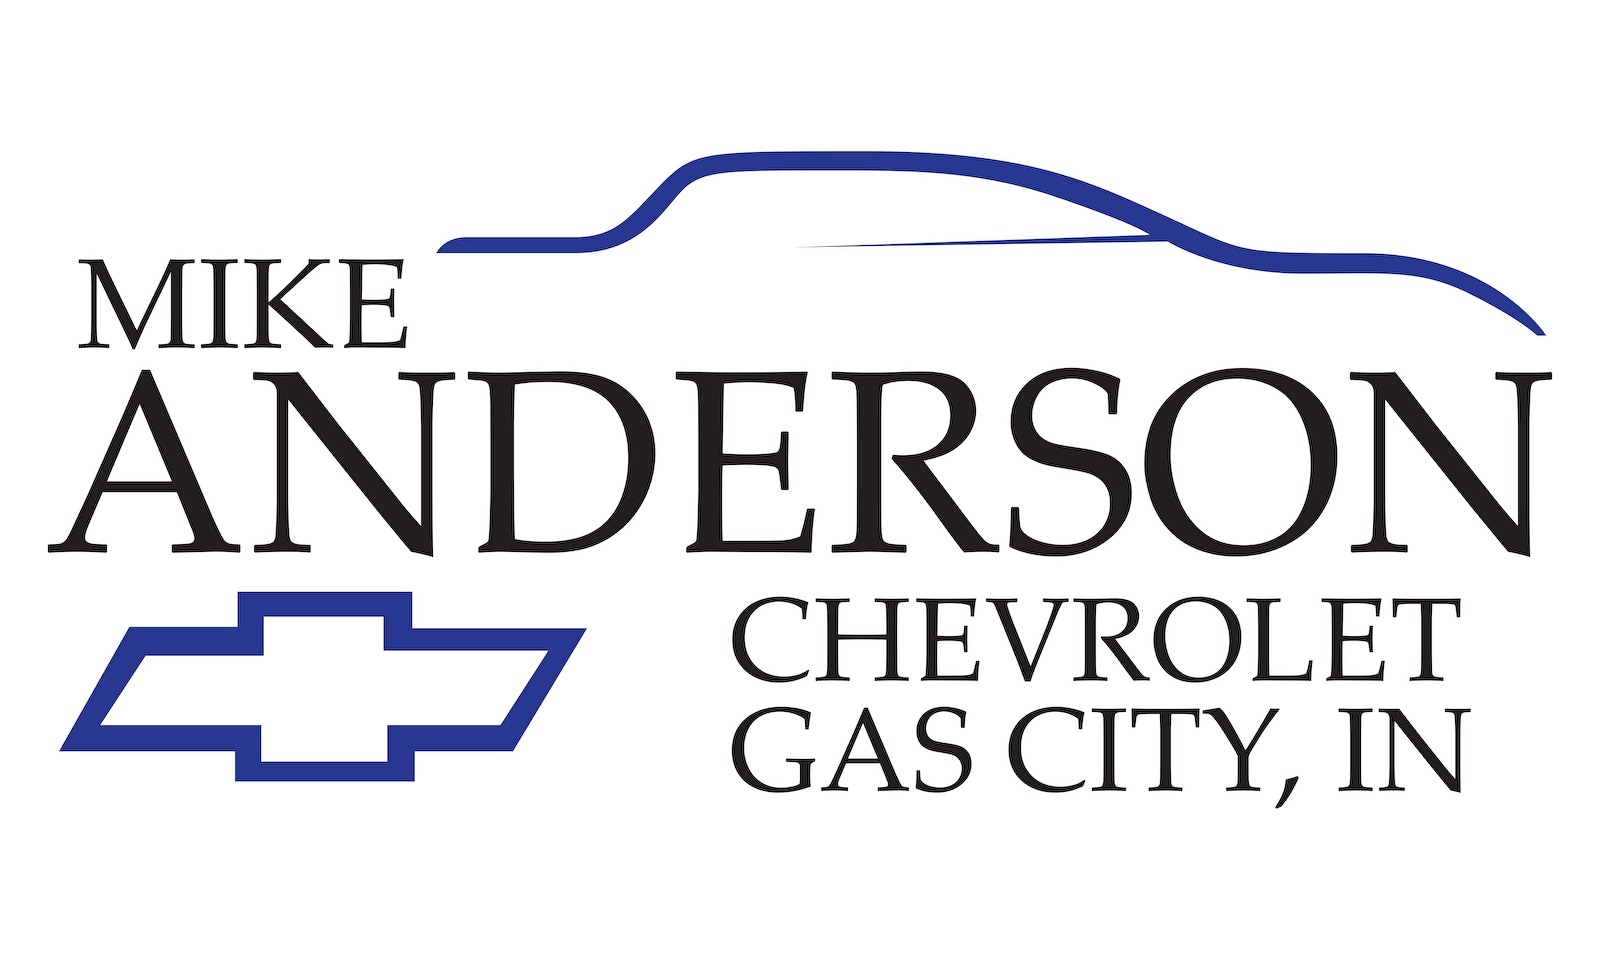 Mike Anderson Chevrolet - Gas City